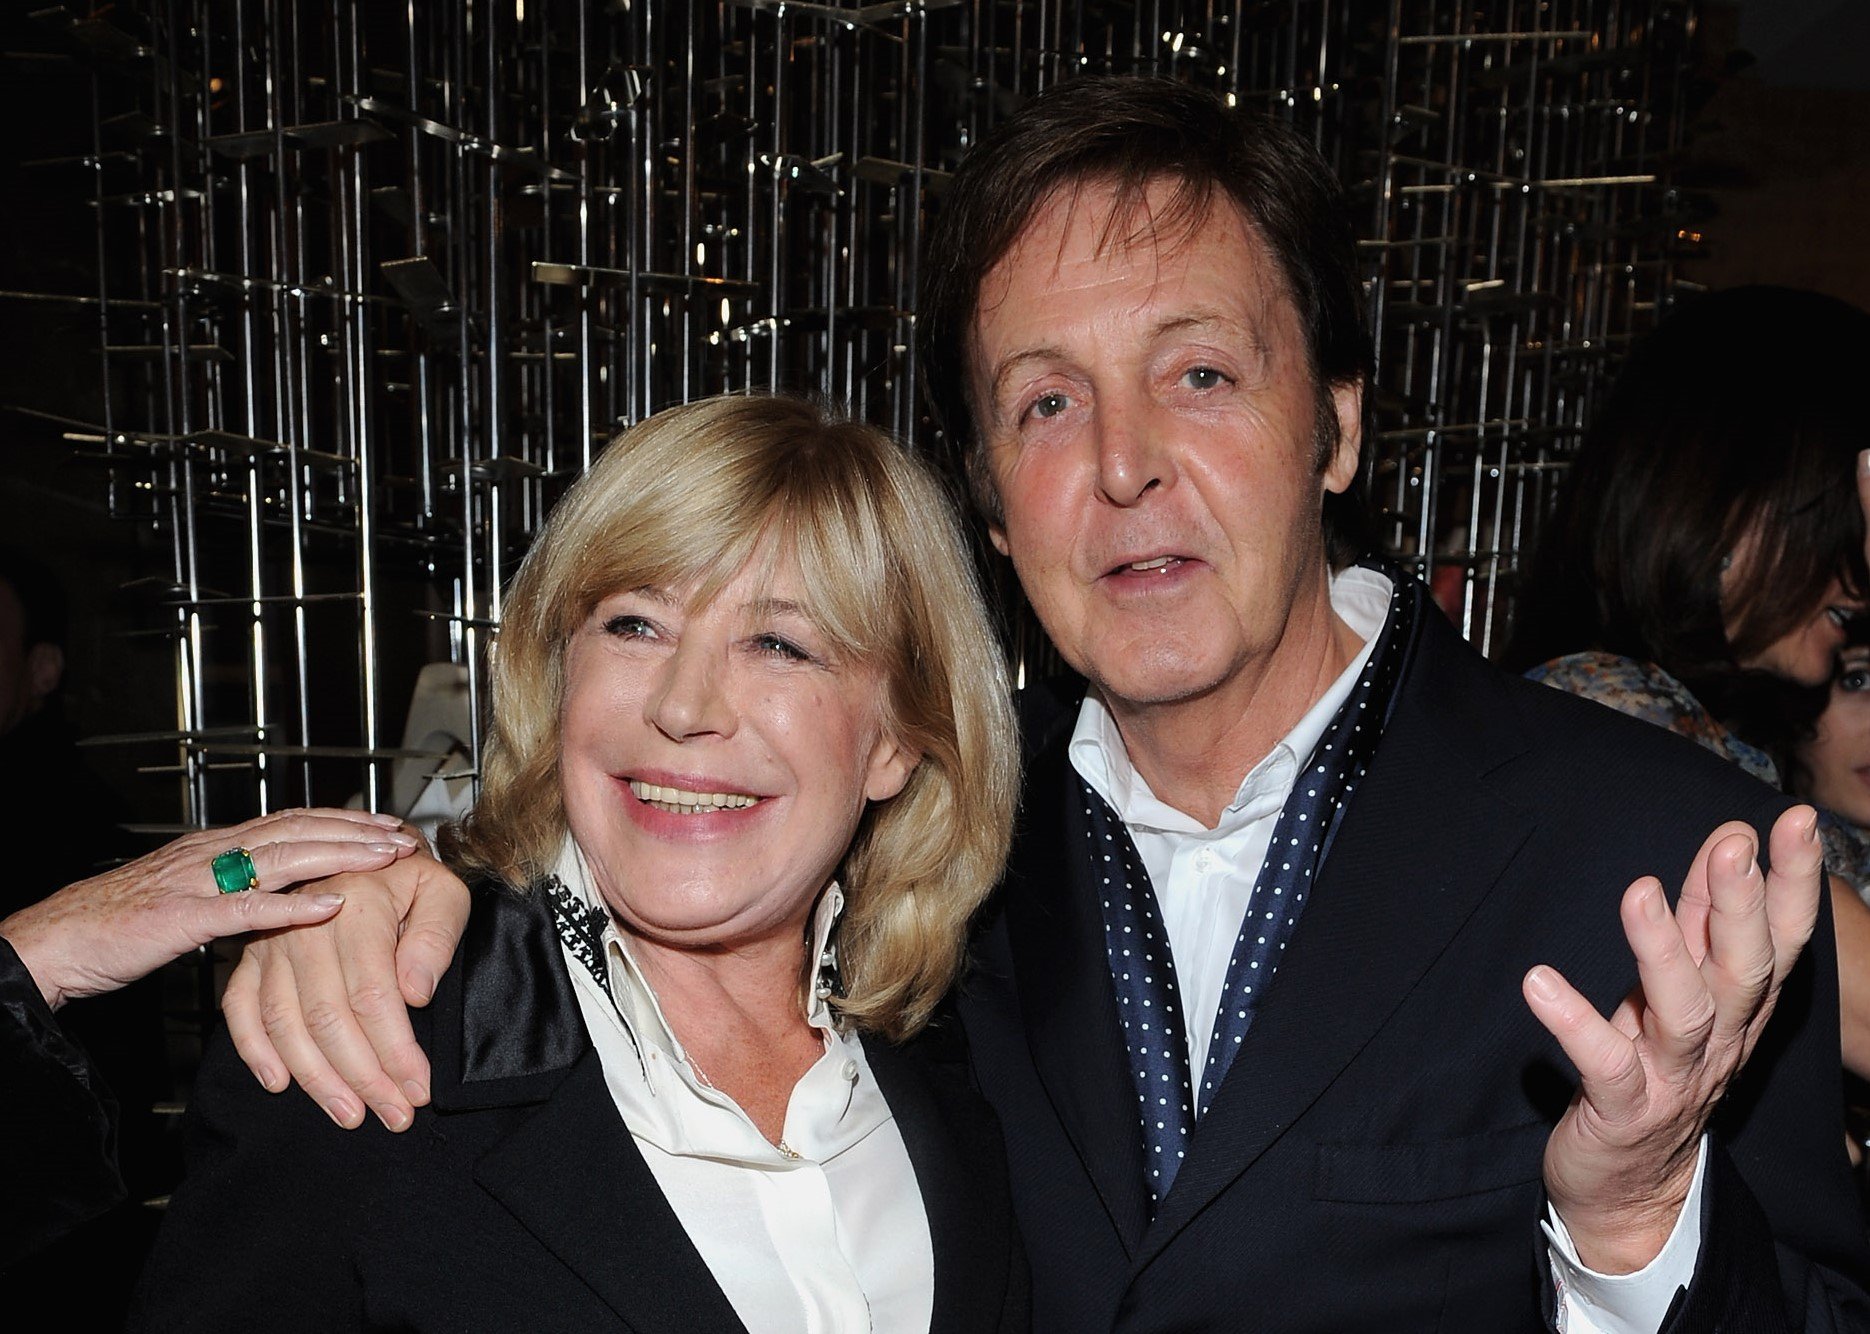 Paul McCartney stands with his arm around Marianne Faithfull's shoulders.